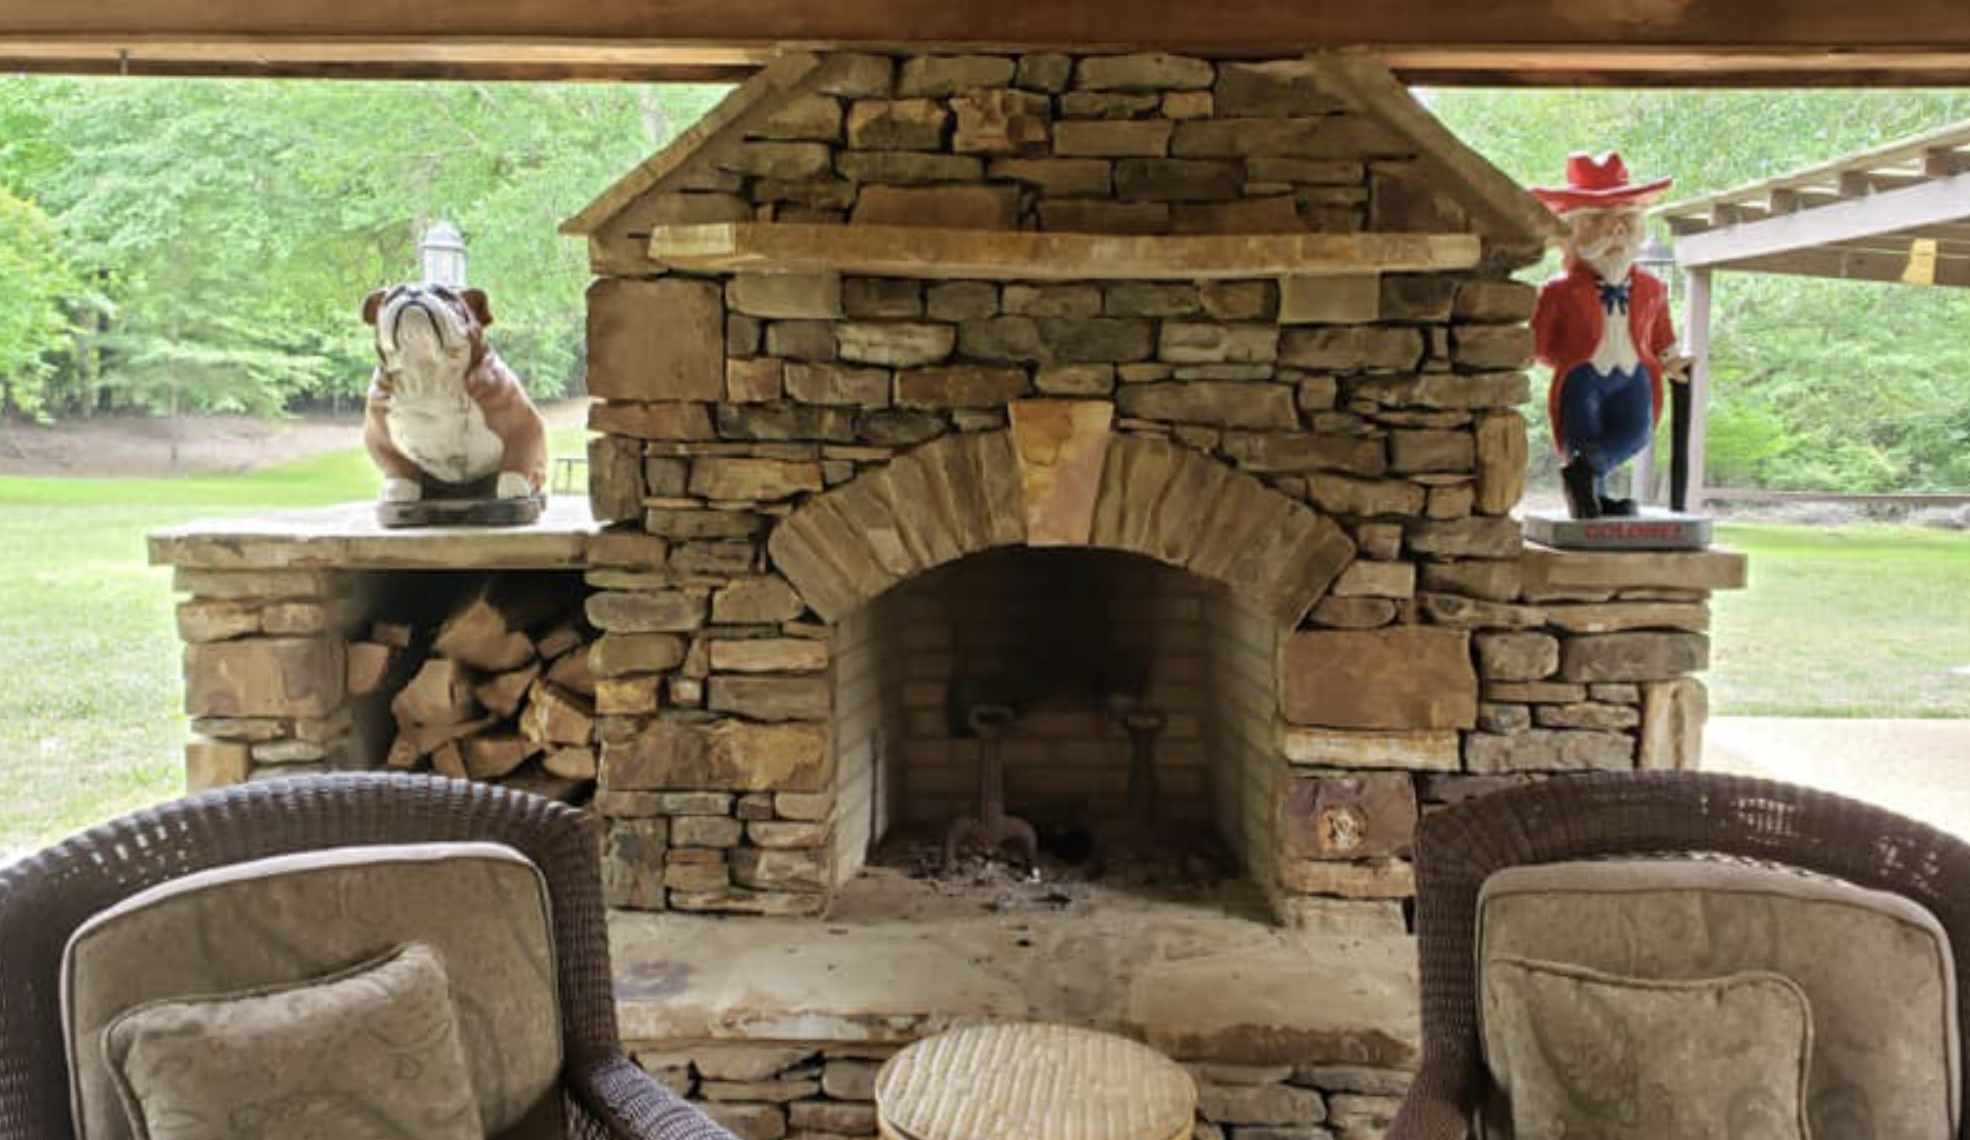 this image shows fireplace in Chino, California